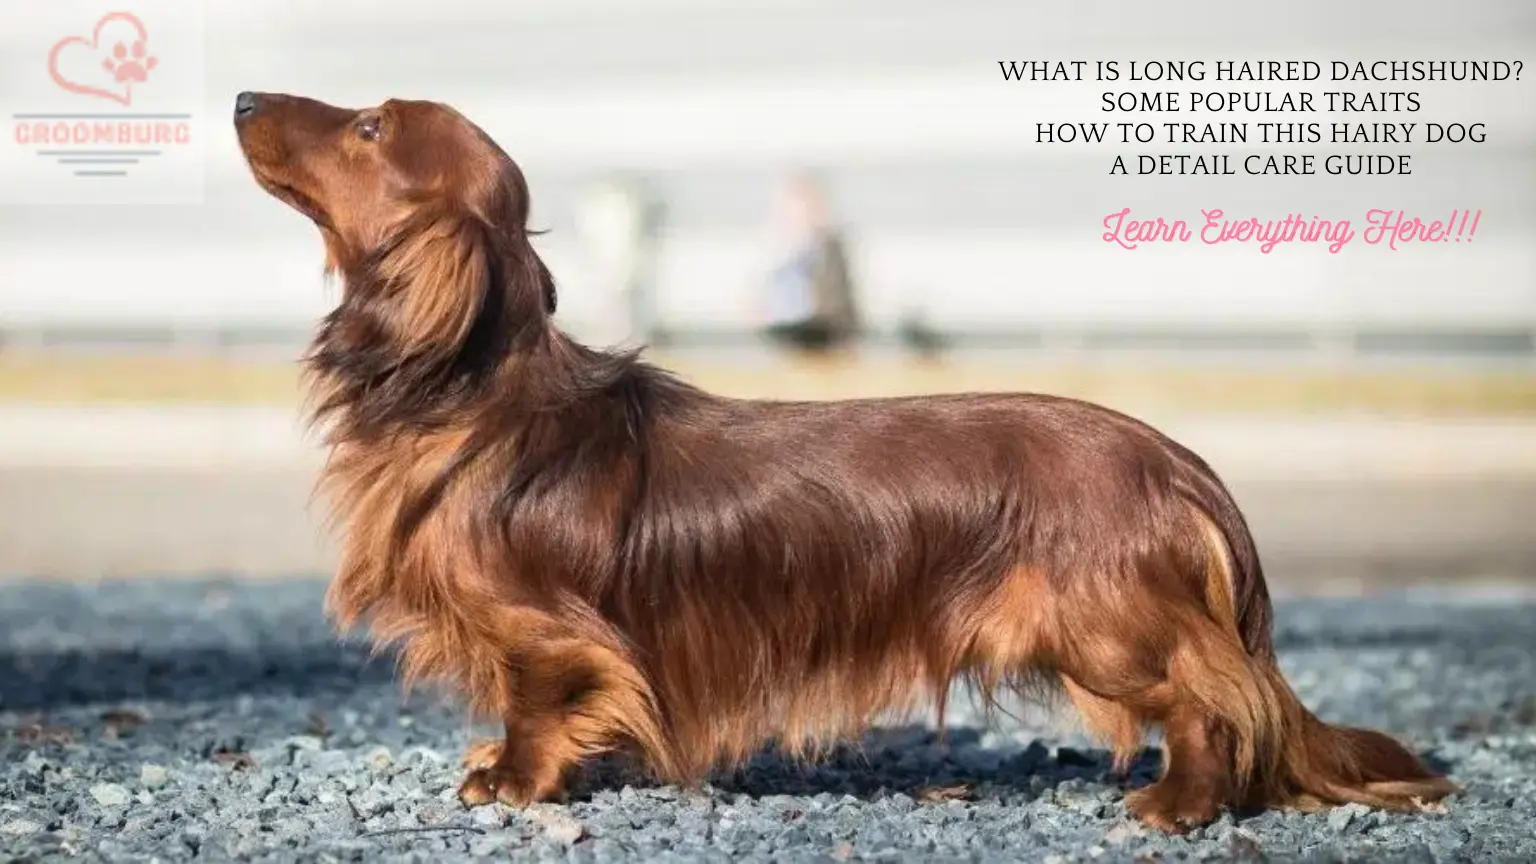 The Stylish Long Haired Weiner Dog Breed – Honest Pet Advice about this Awesome Dachshund